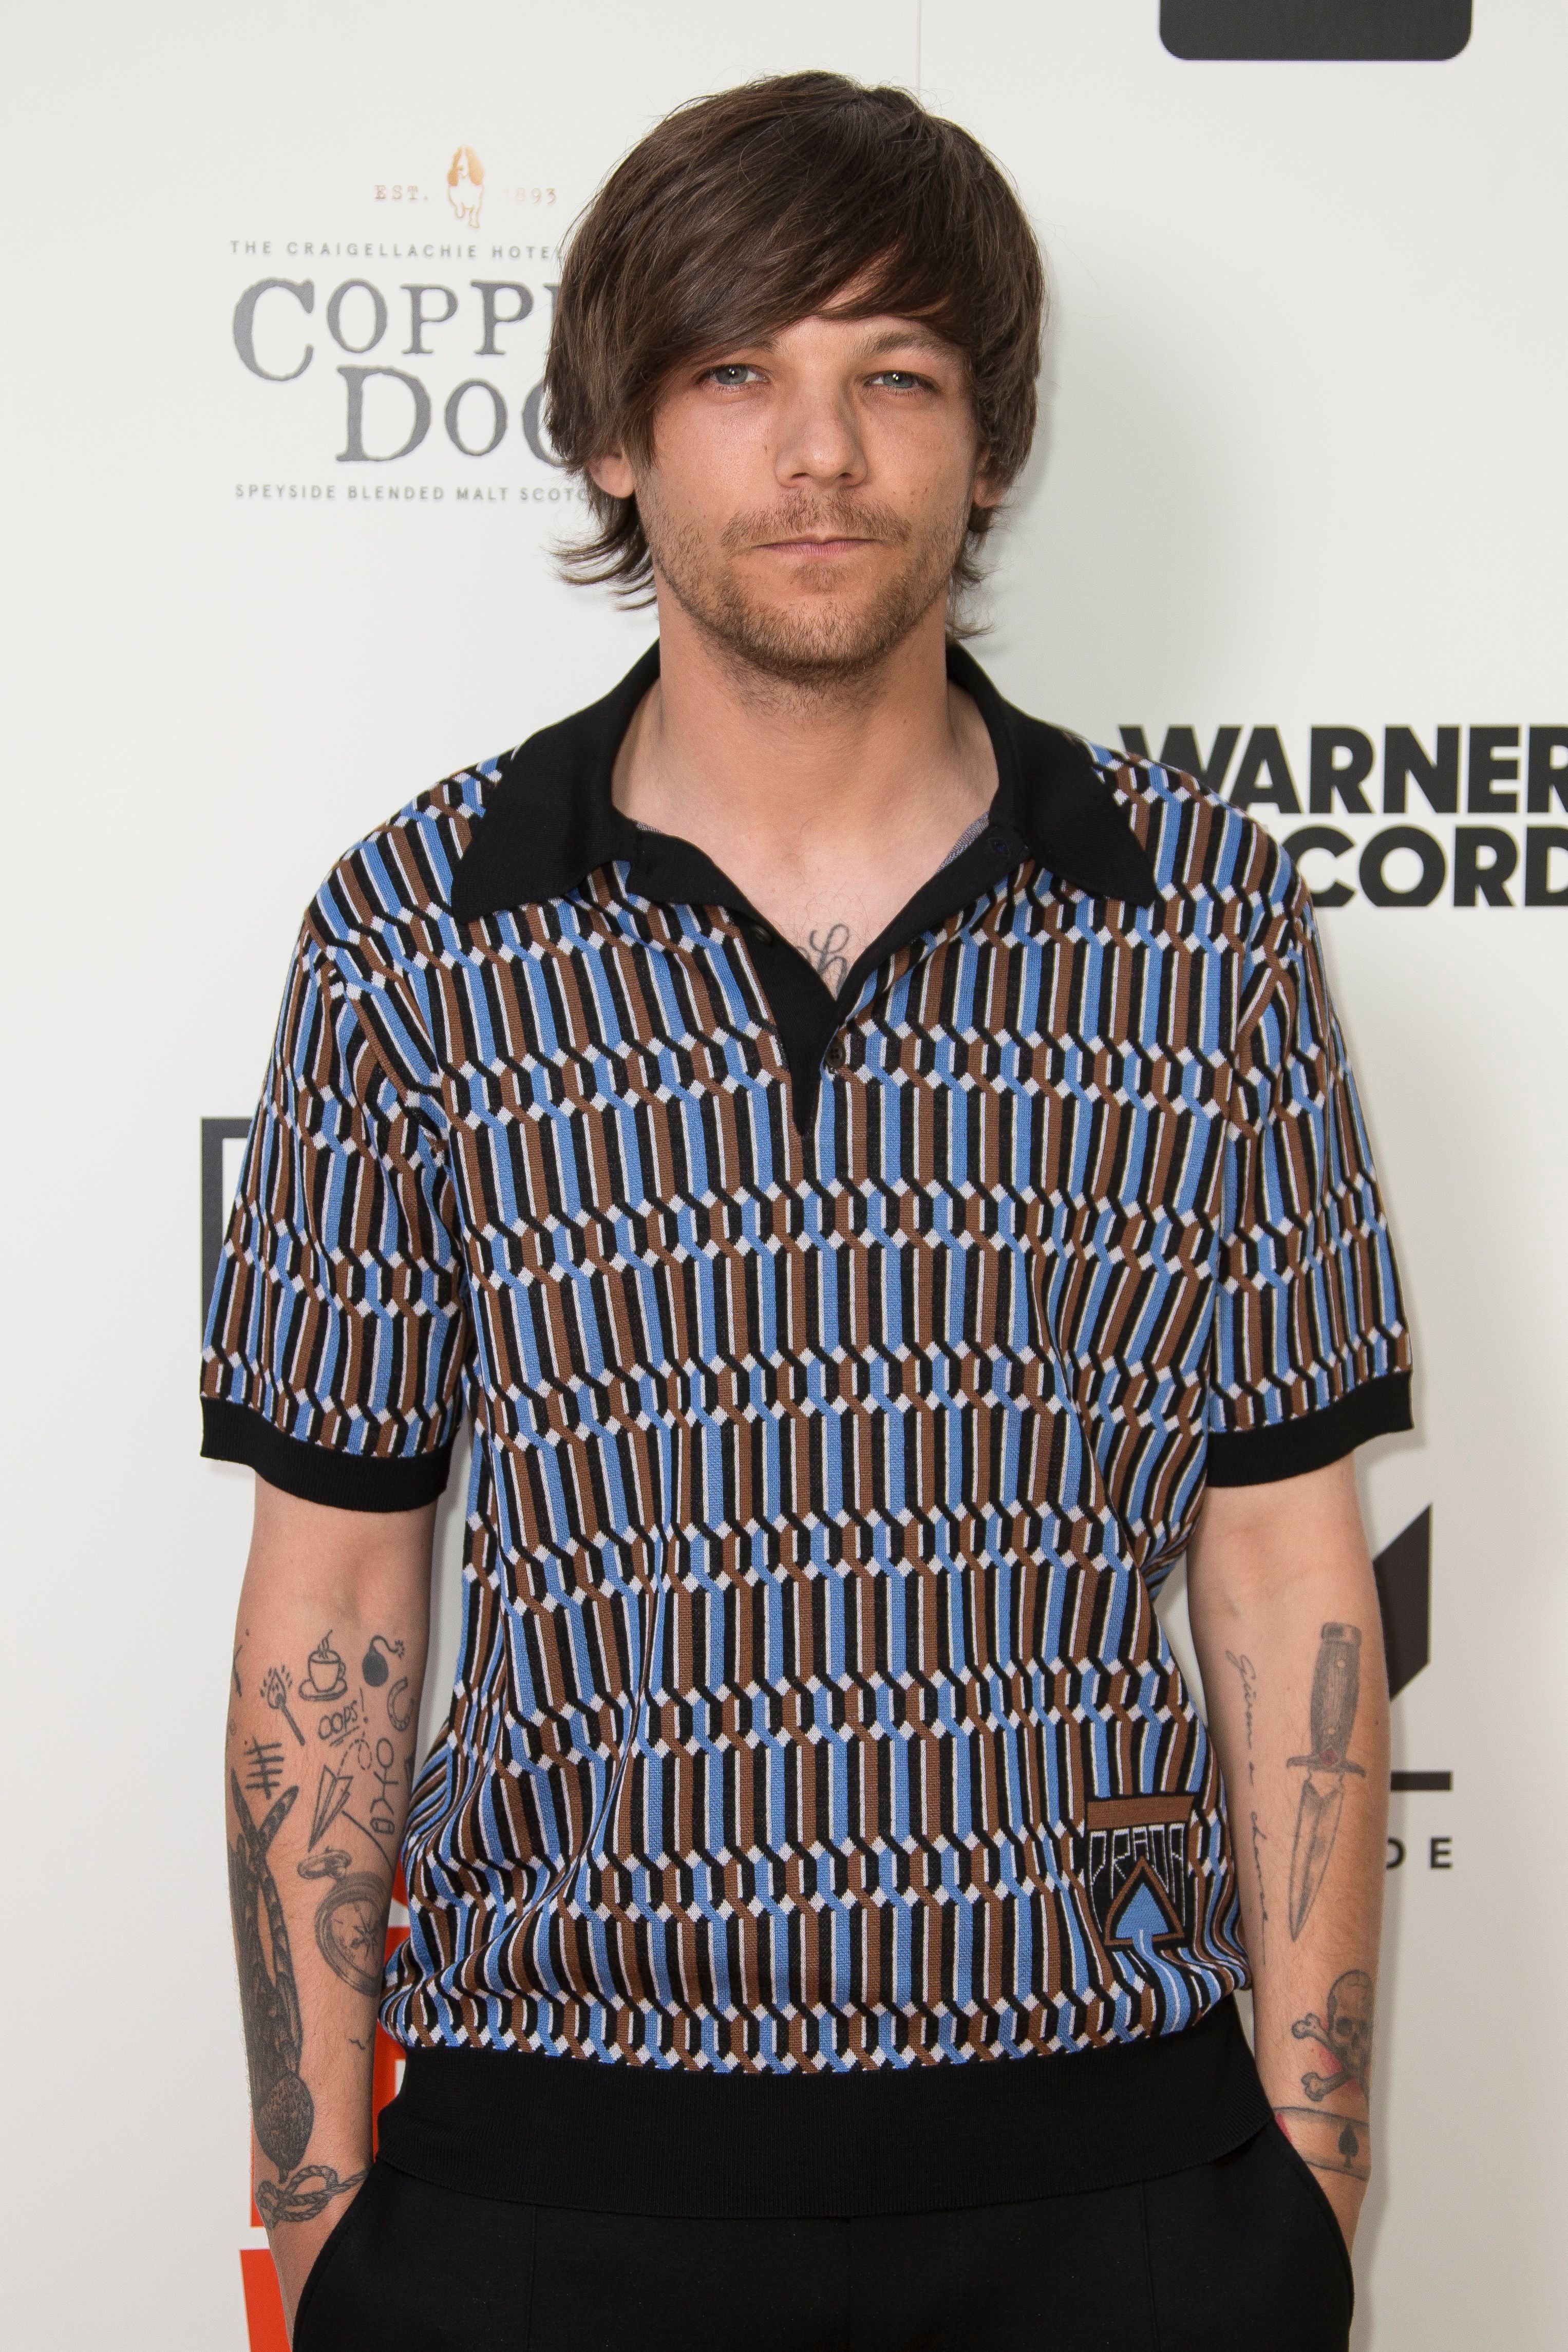 Louis Tomlinson: One Direction Reunion Is 'Inevitable